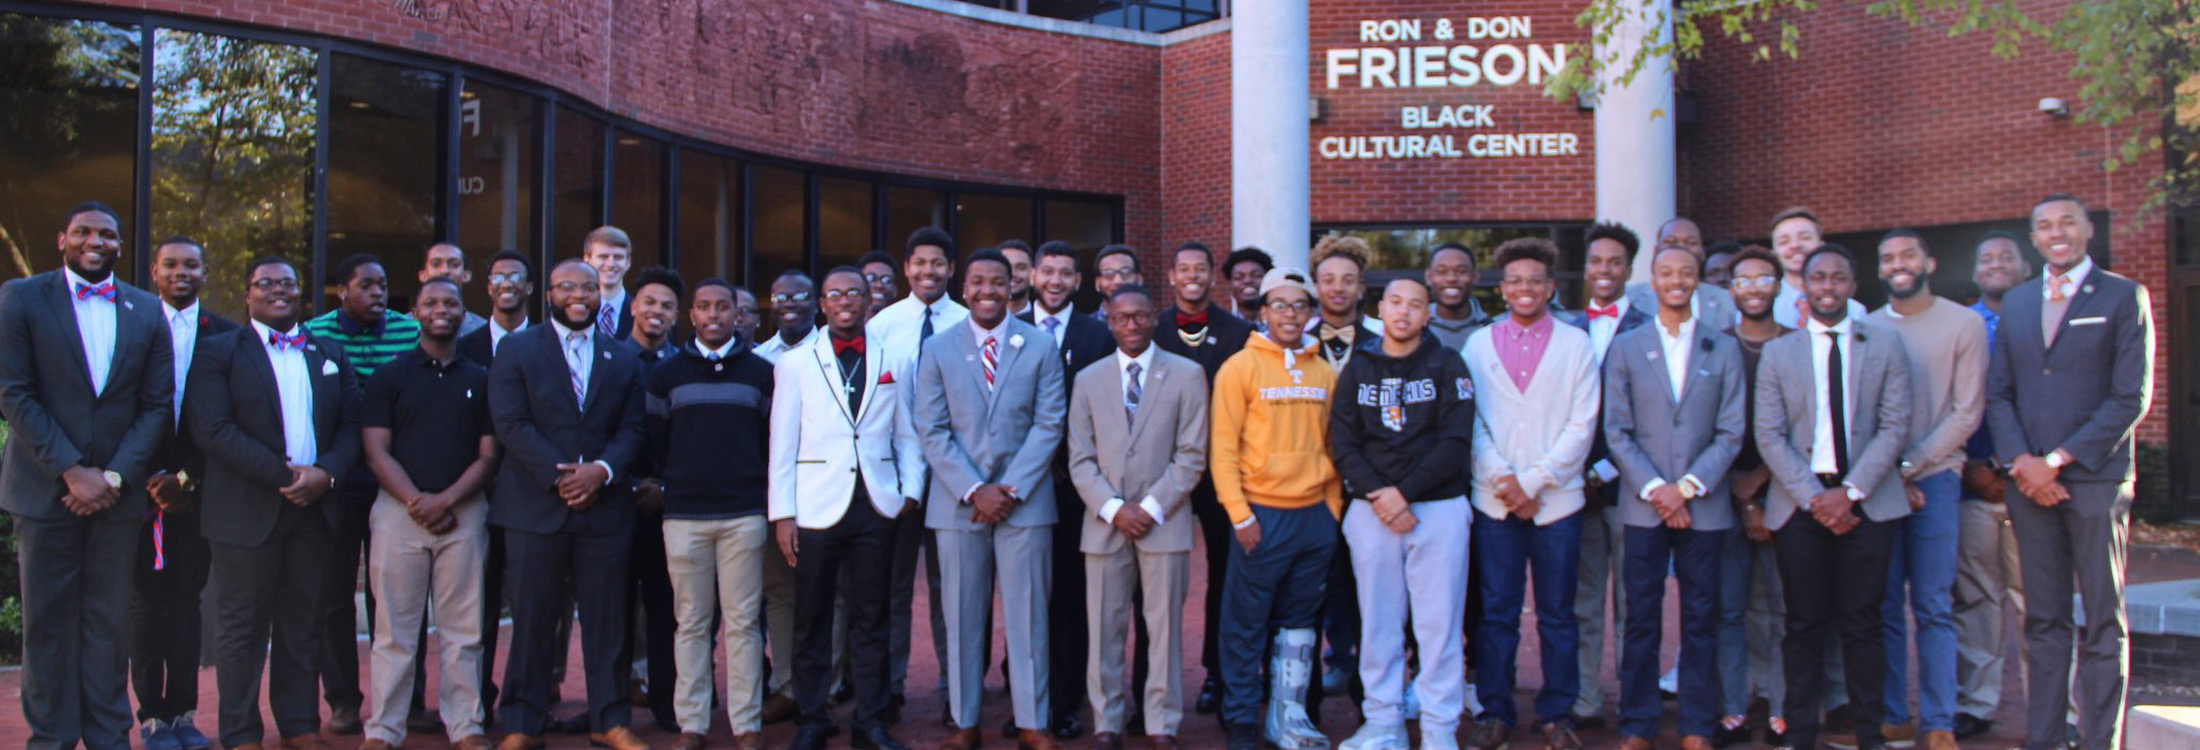 Students of BUE posed outside Frieson Black Cultural Center